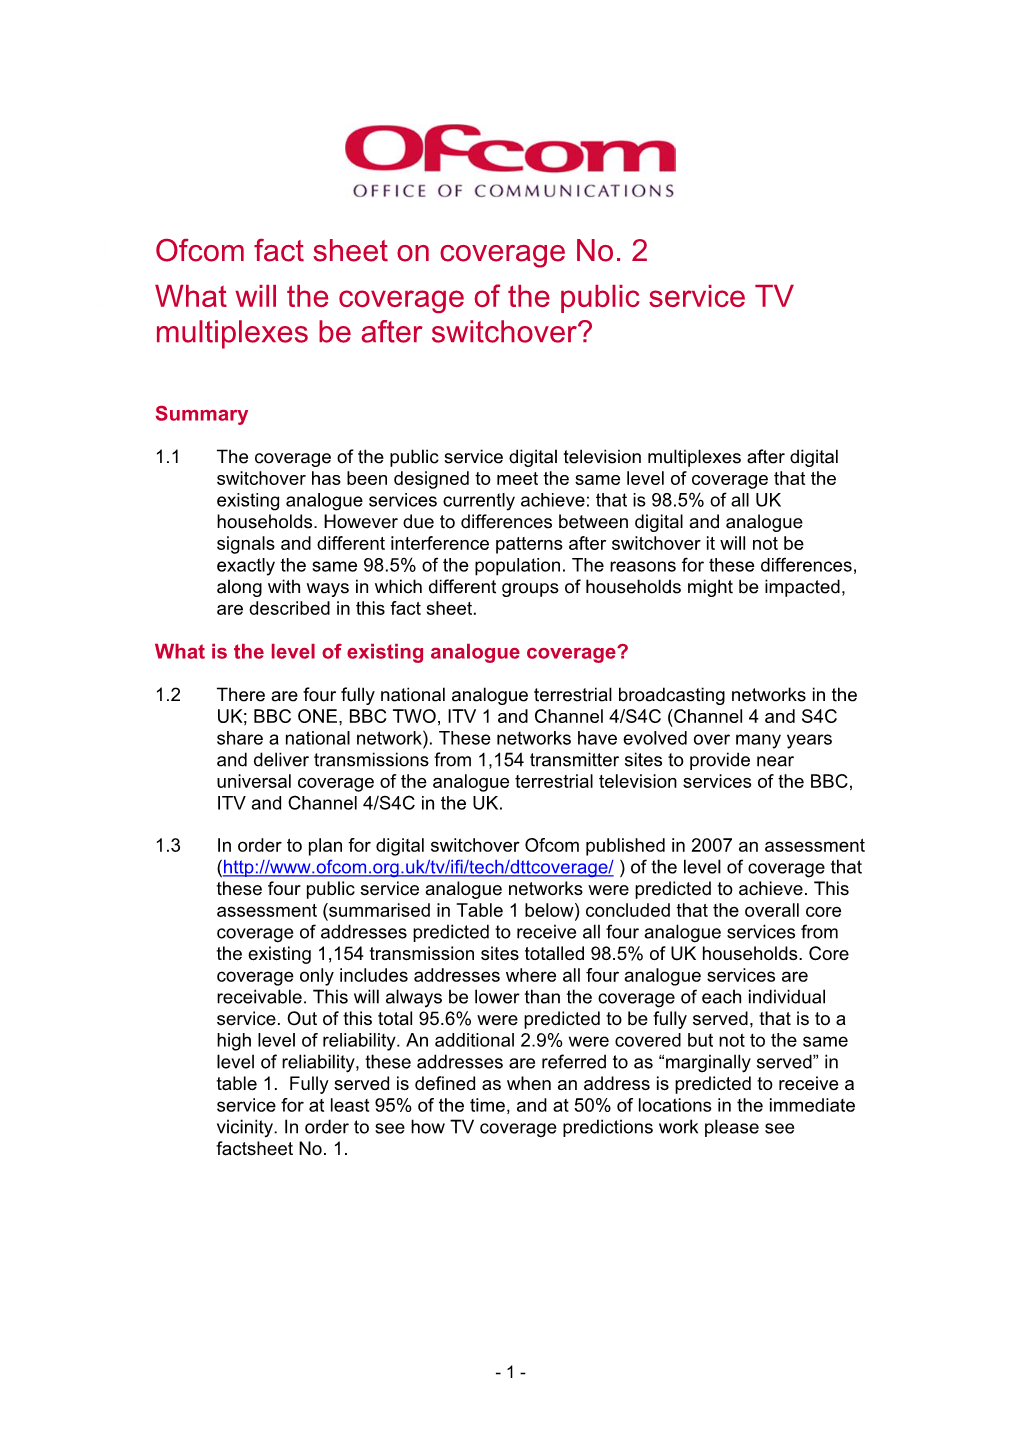 Ofcom Fact Sheet on Coverage No. 2 2 What Will the Coverage of the Public Service TV Multiplexes Be After Switchover?